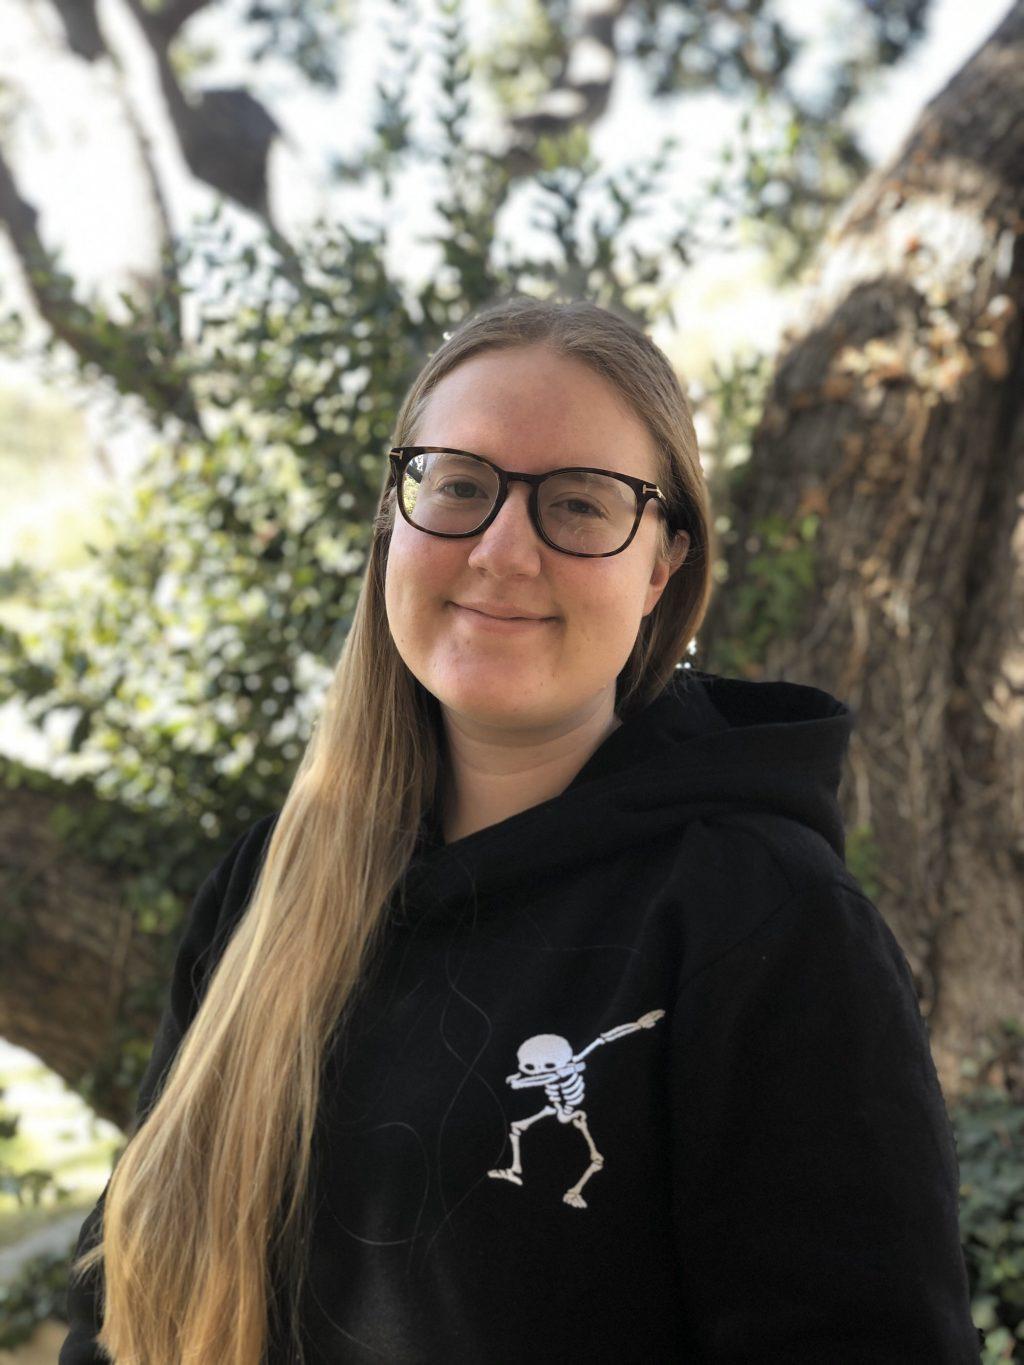 Grace Ramsey started on Discord by building a server for the Pepperdine eSports Program, which created an effective way for gamers to connect digitally. They later created the server that the Pepperdine community uses. Photo courtesy of Grace Ramsey